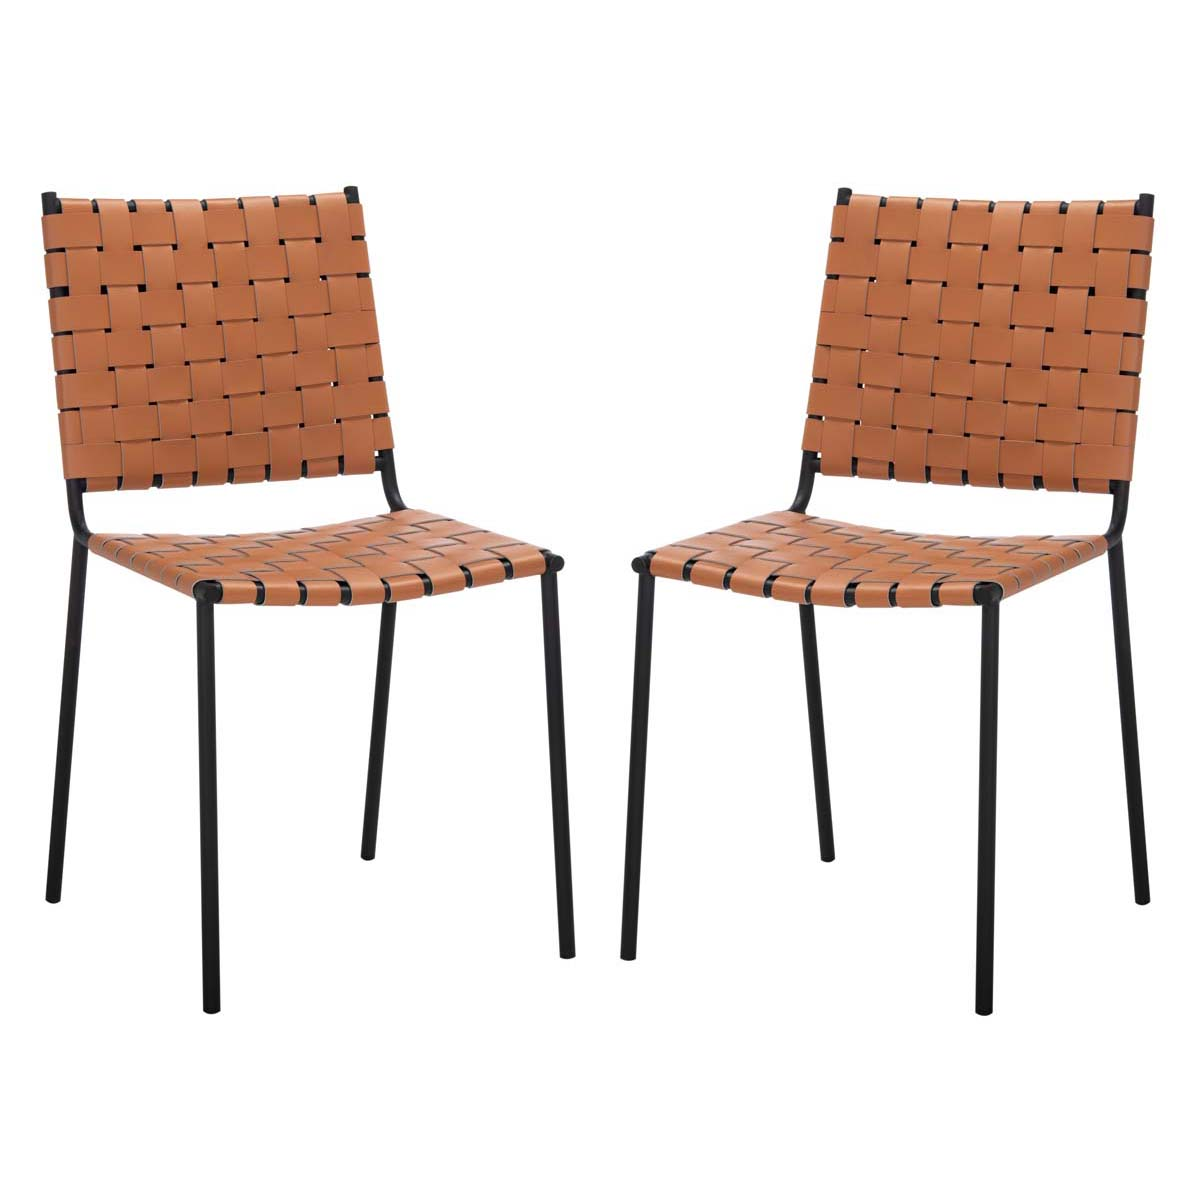 Safavieh Wesson Woven Dining Chair , DCH3005